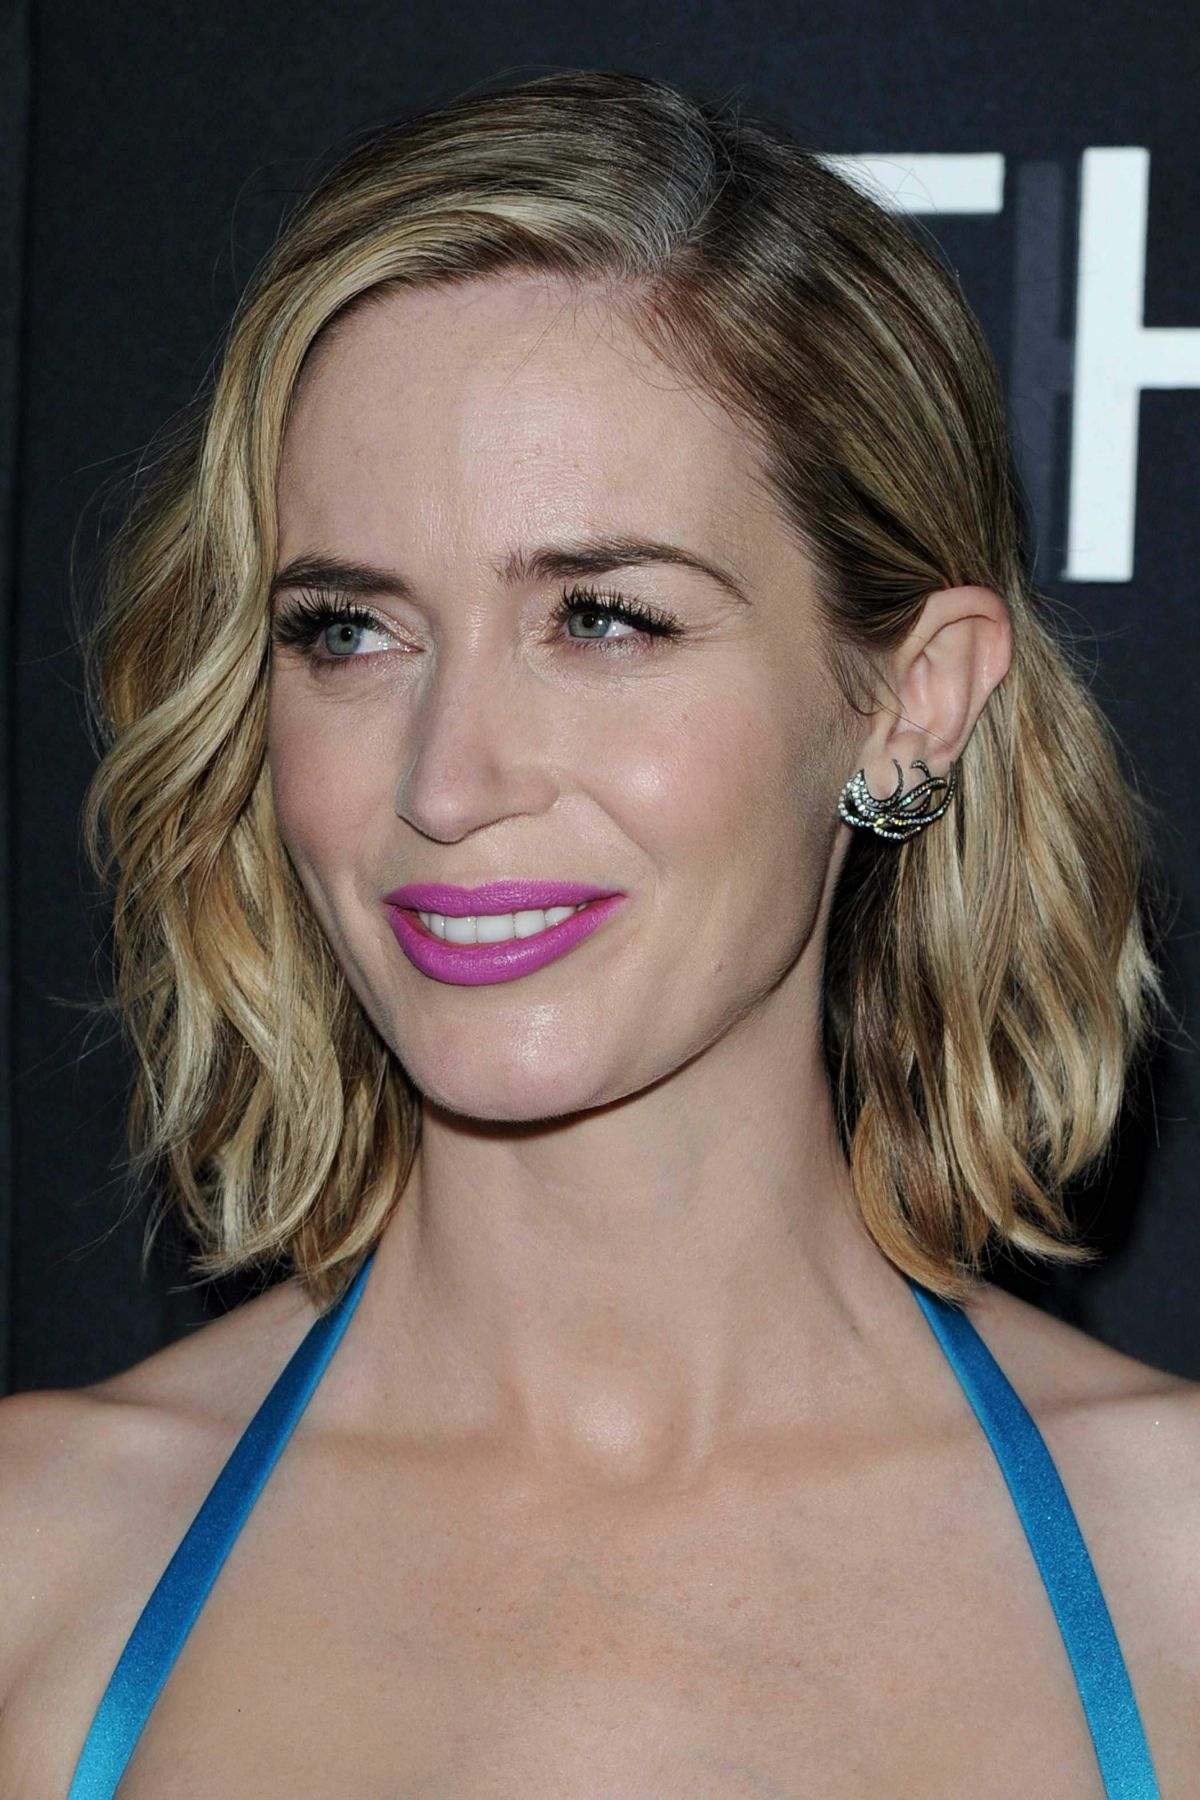 Hairstyle Trends, Review, Get The Look: Emily Blunt The Girl On The Train Movie Premiere, StriVectin Ultimate Restore Densifying Foaming Treatment, Color Care Vibrancy Booster, Max Volume Bodifying Radiance Serum, Fall 2016